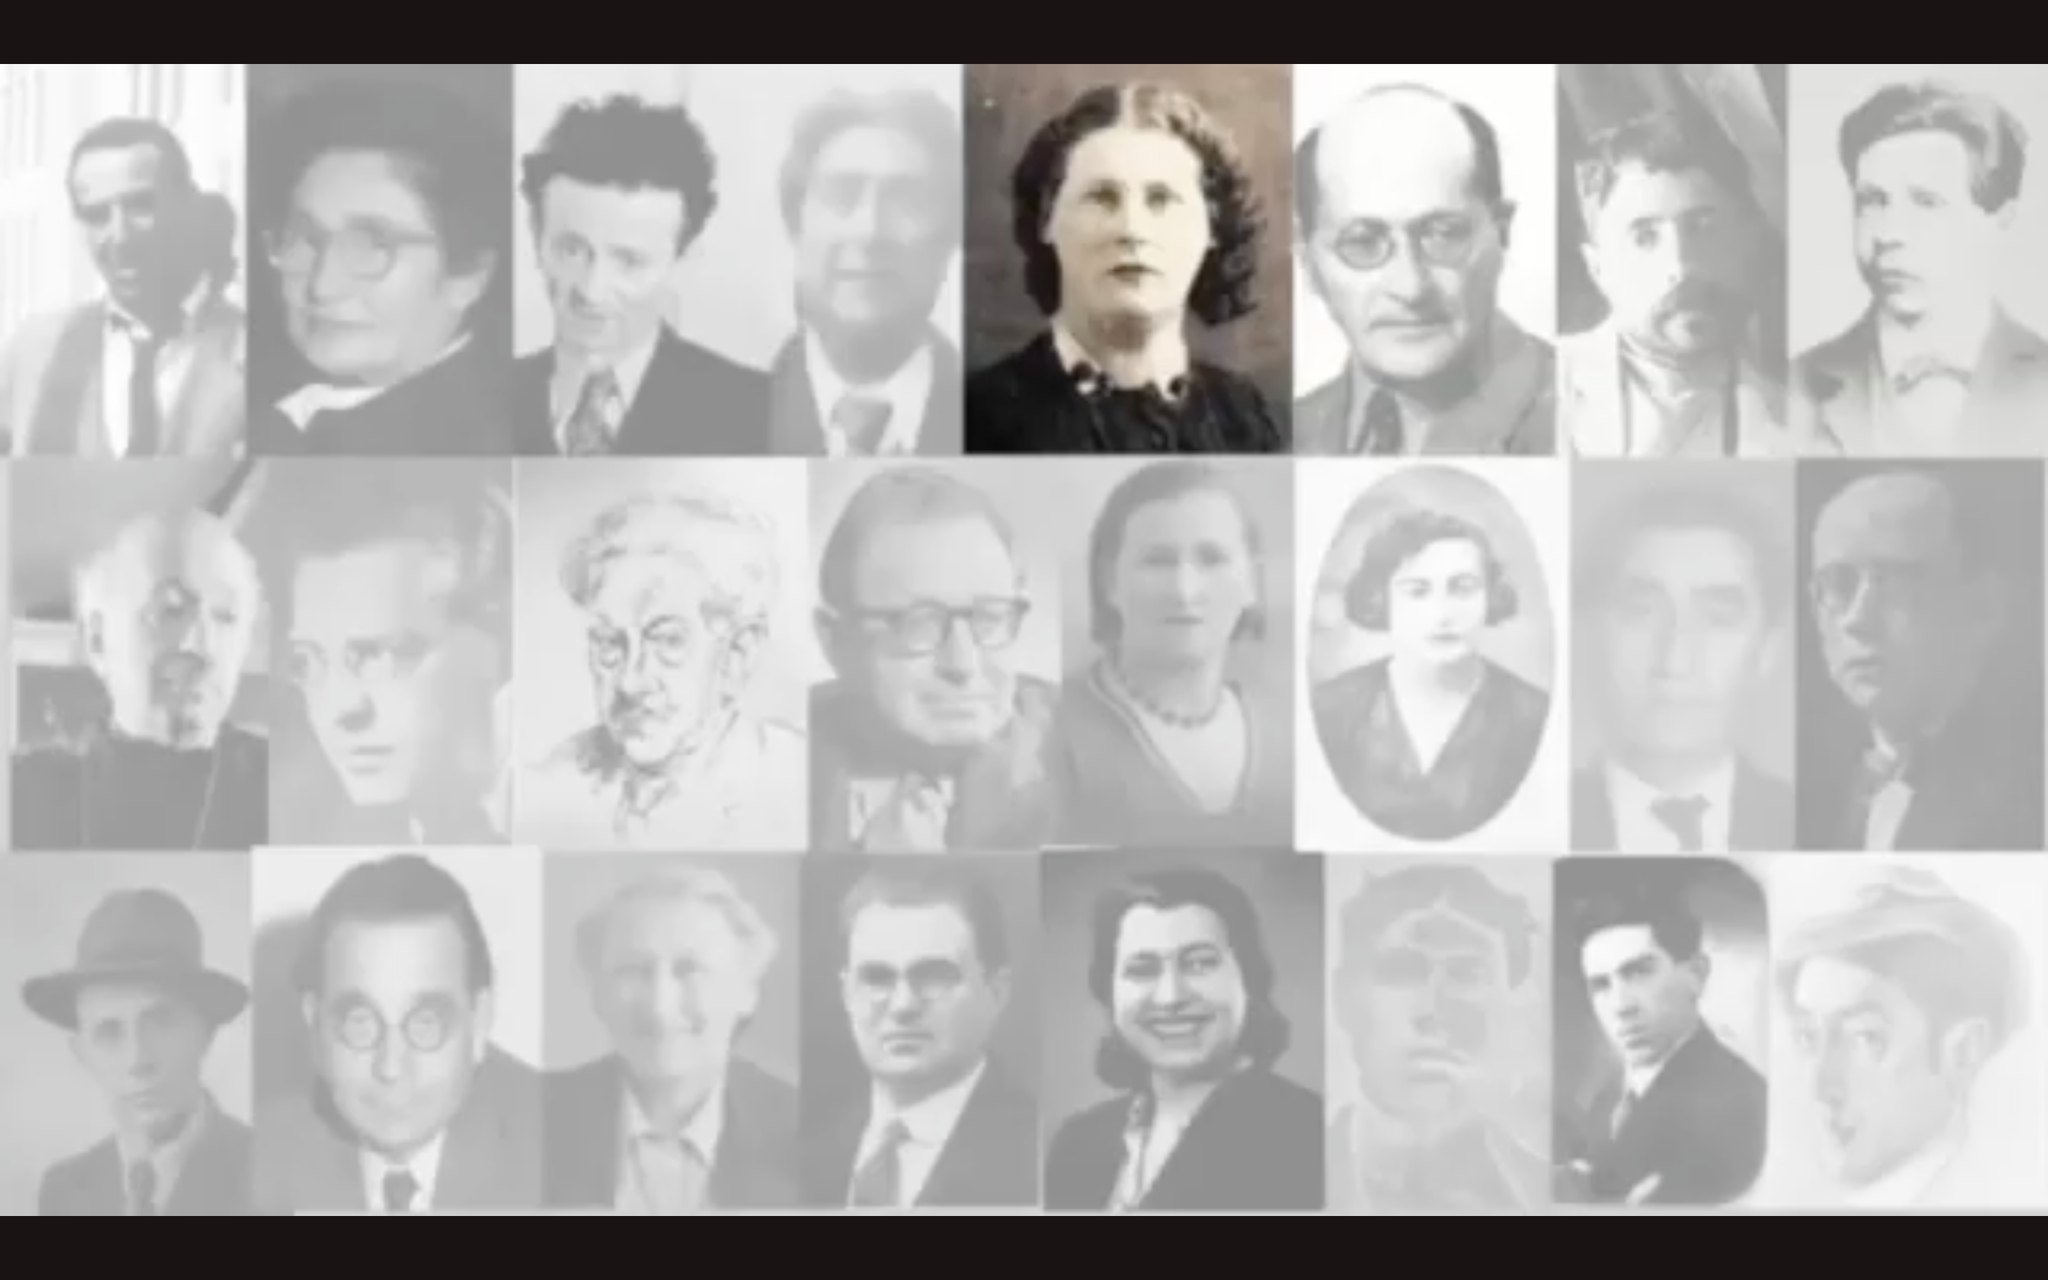 Missed any of our series on The Yiddishists? Catch up now on the JR YouTube channel, featuring Yiddish pop culture, Freud, Isaac Bashevis Singer&rsquo;s little known sister Esther Kreitman, plus much more:  youtube.com/JewishRenaissance 

Hosted w/ @